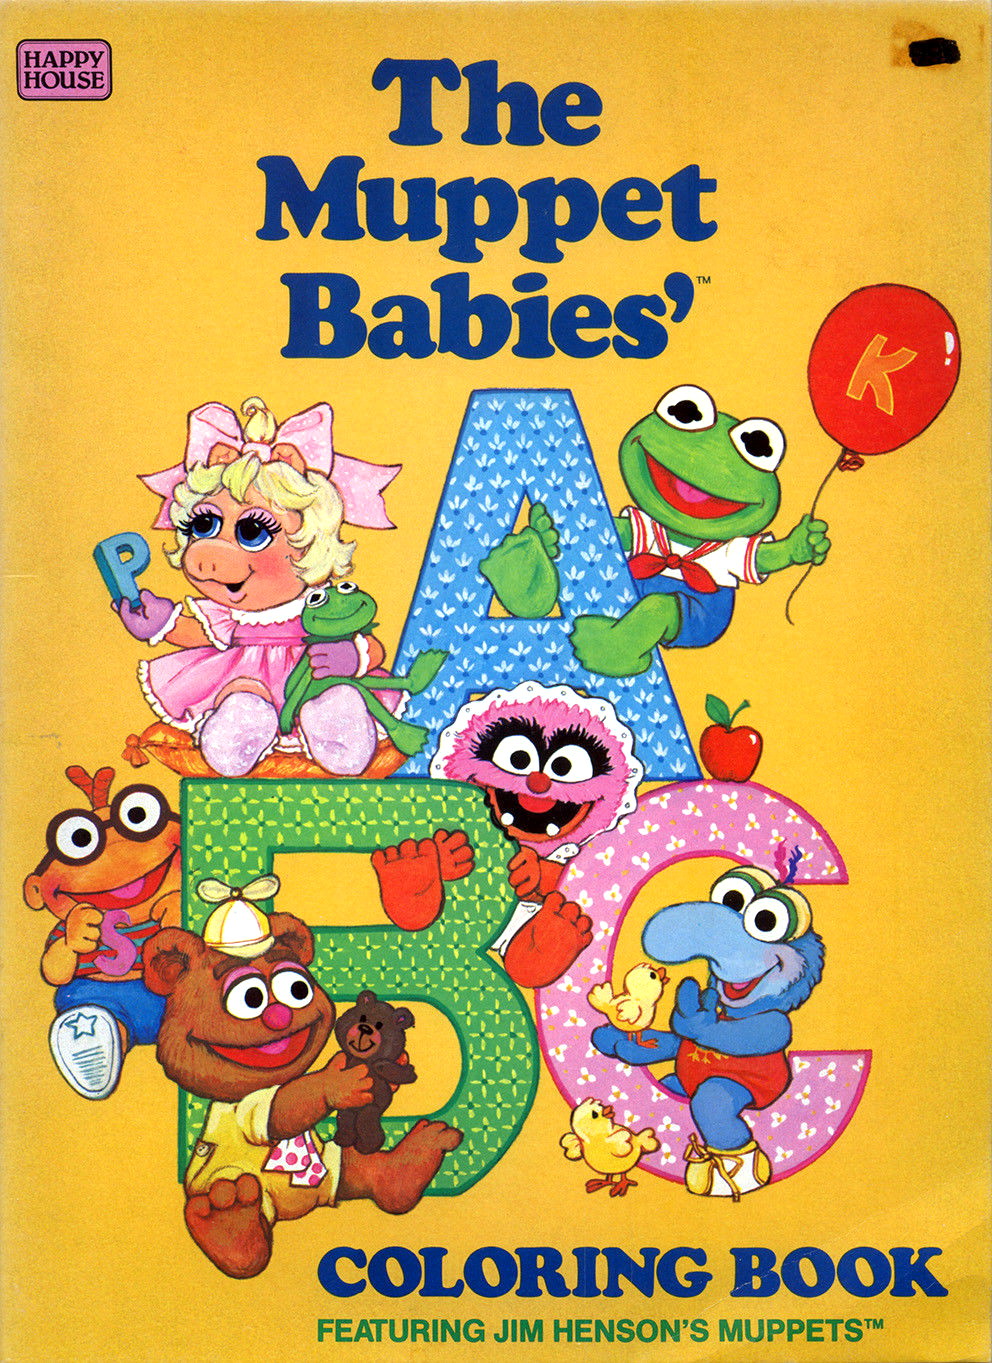 Muppet Babies coloring books | Muppet Wiki | FANDOM powered by Wikia